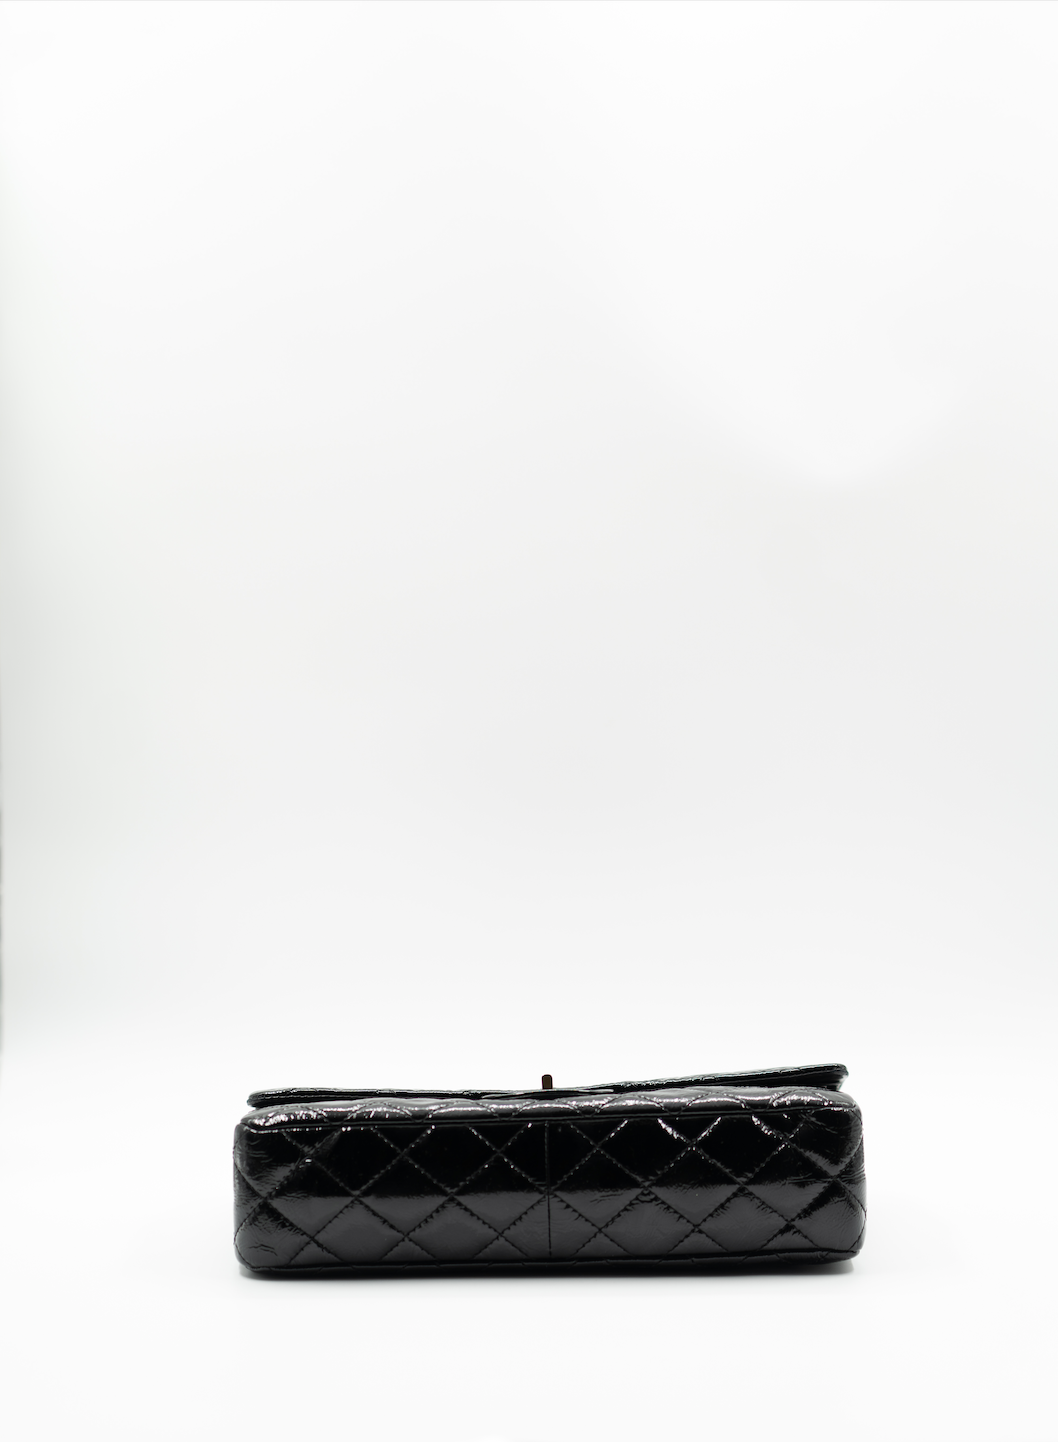 Chanel 2.55 Reissue in black patent leater